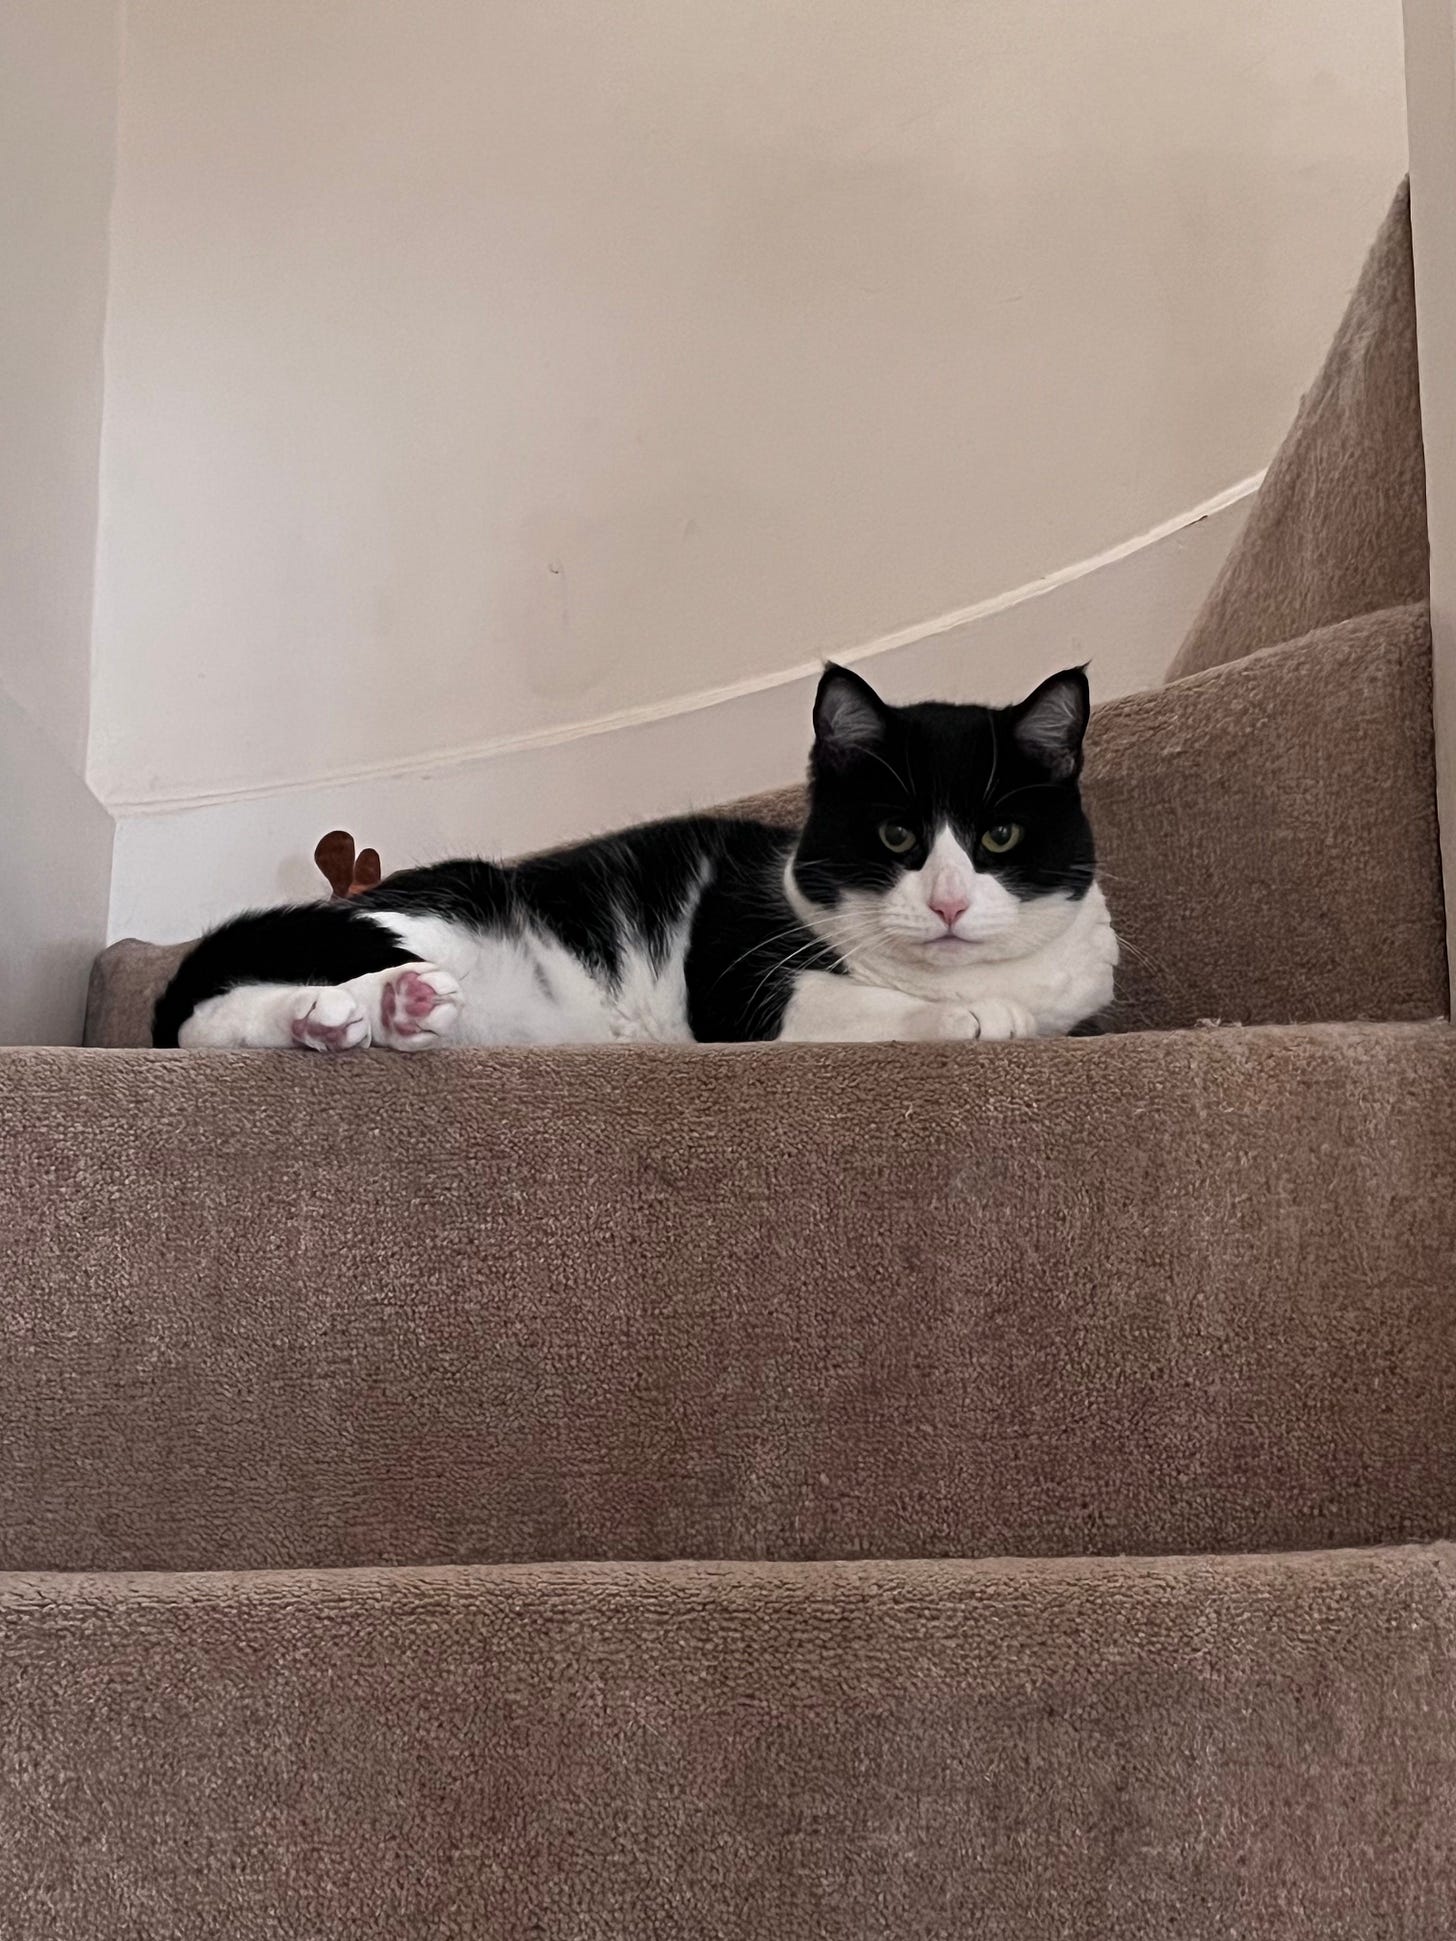 A black & white cat sat on cream coloured stair carpet with a stern or grumpy expression, paws crossed for comfort.